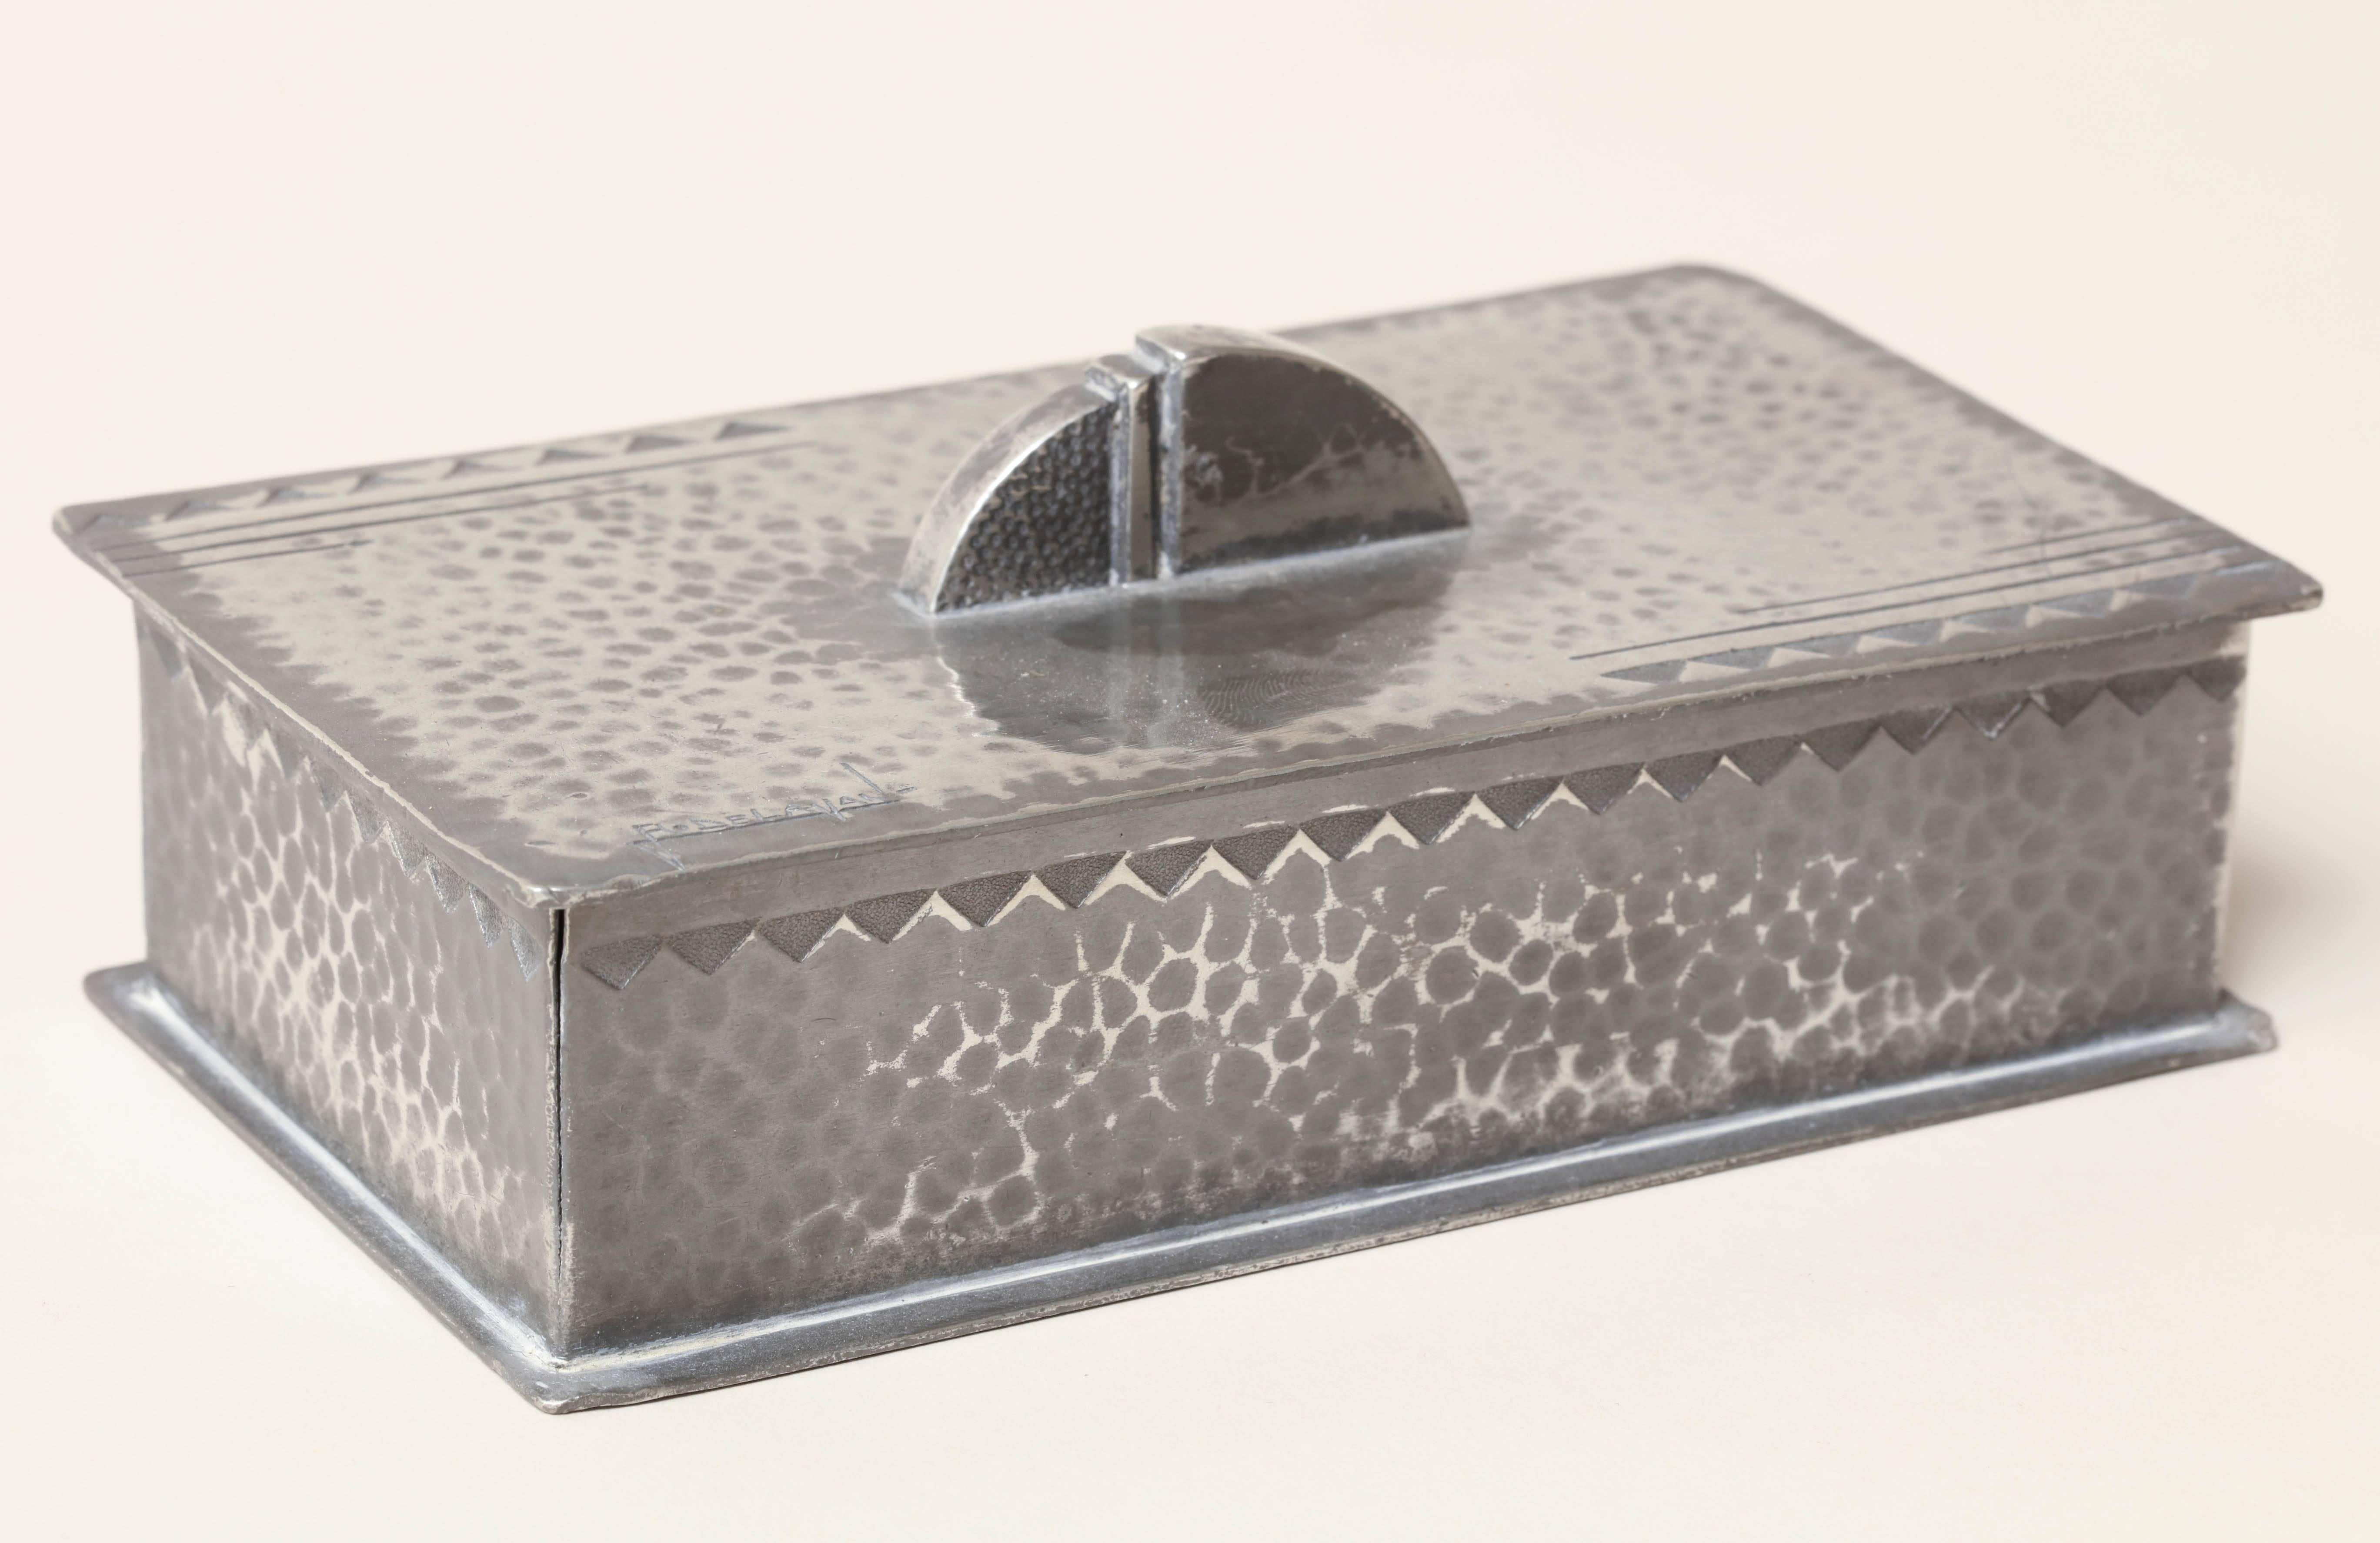 Hand-wrought rectangular dinanderie pewter martele box with triangles around rim and cubistic handle.

Signed R. Delavan on top/ impressed ETAIN GARANTI and numbered 329-2 underneath.
  